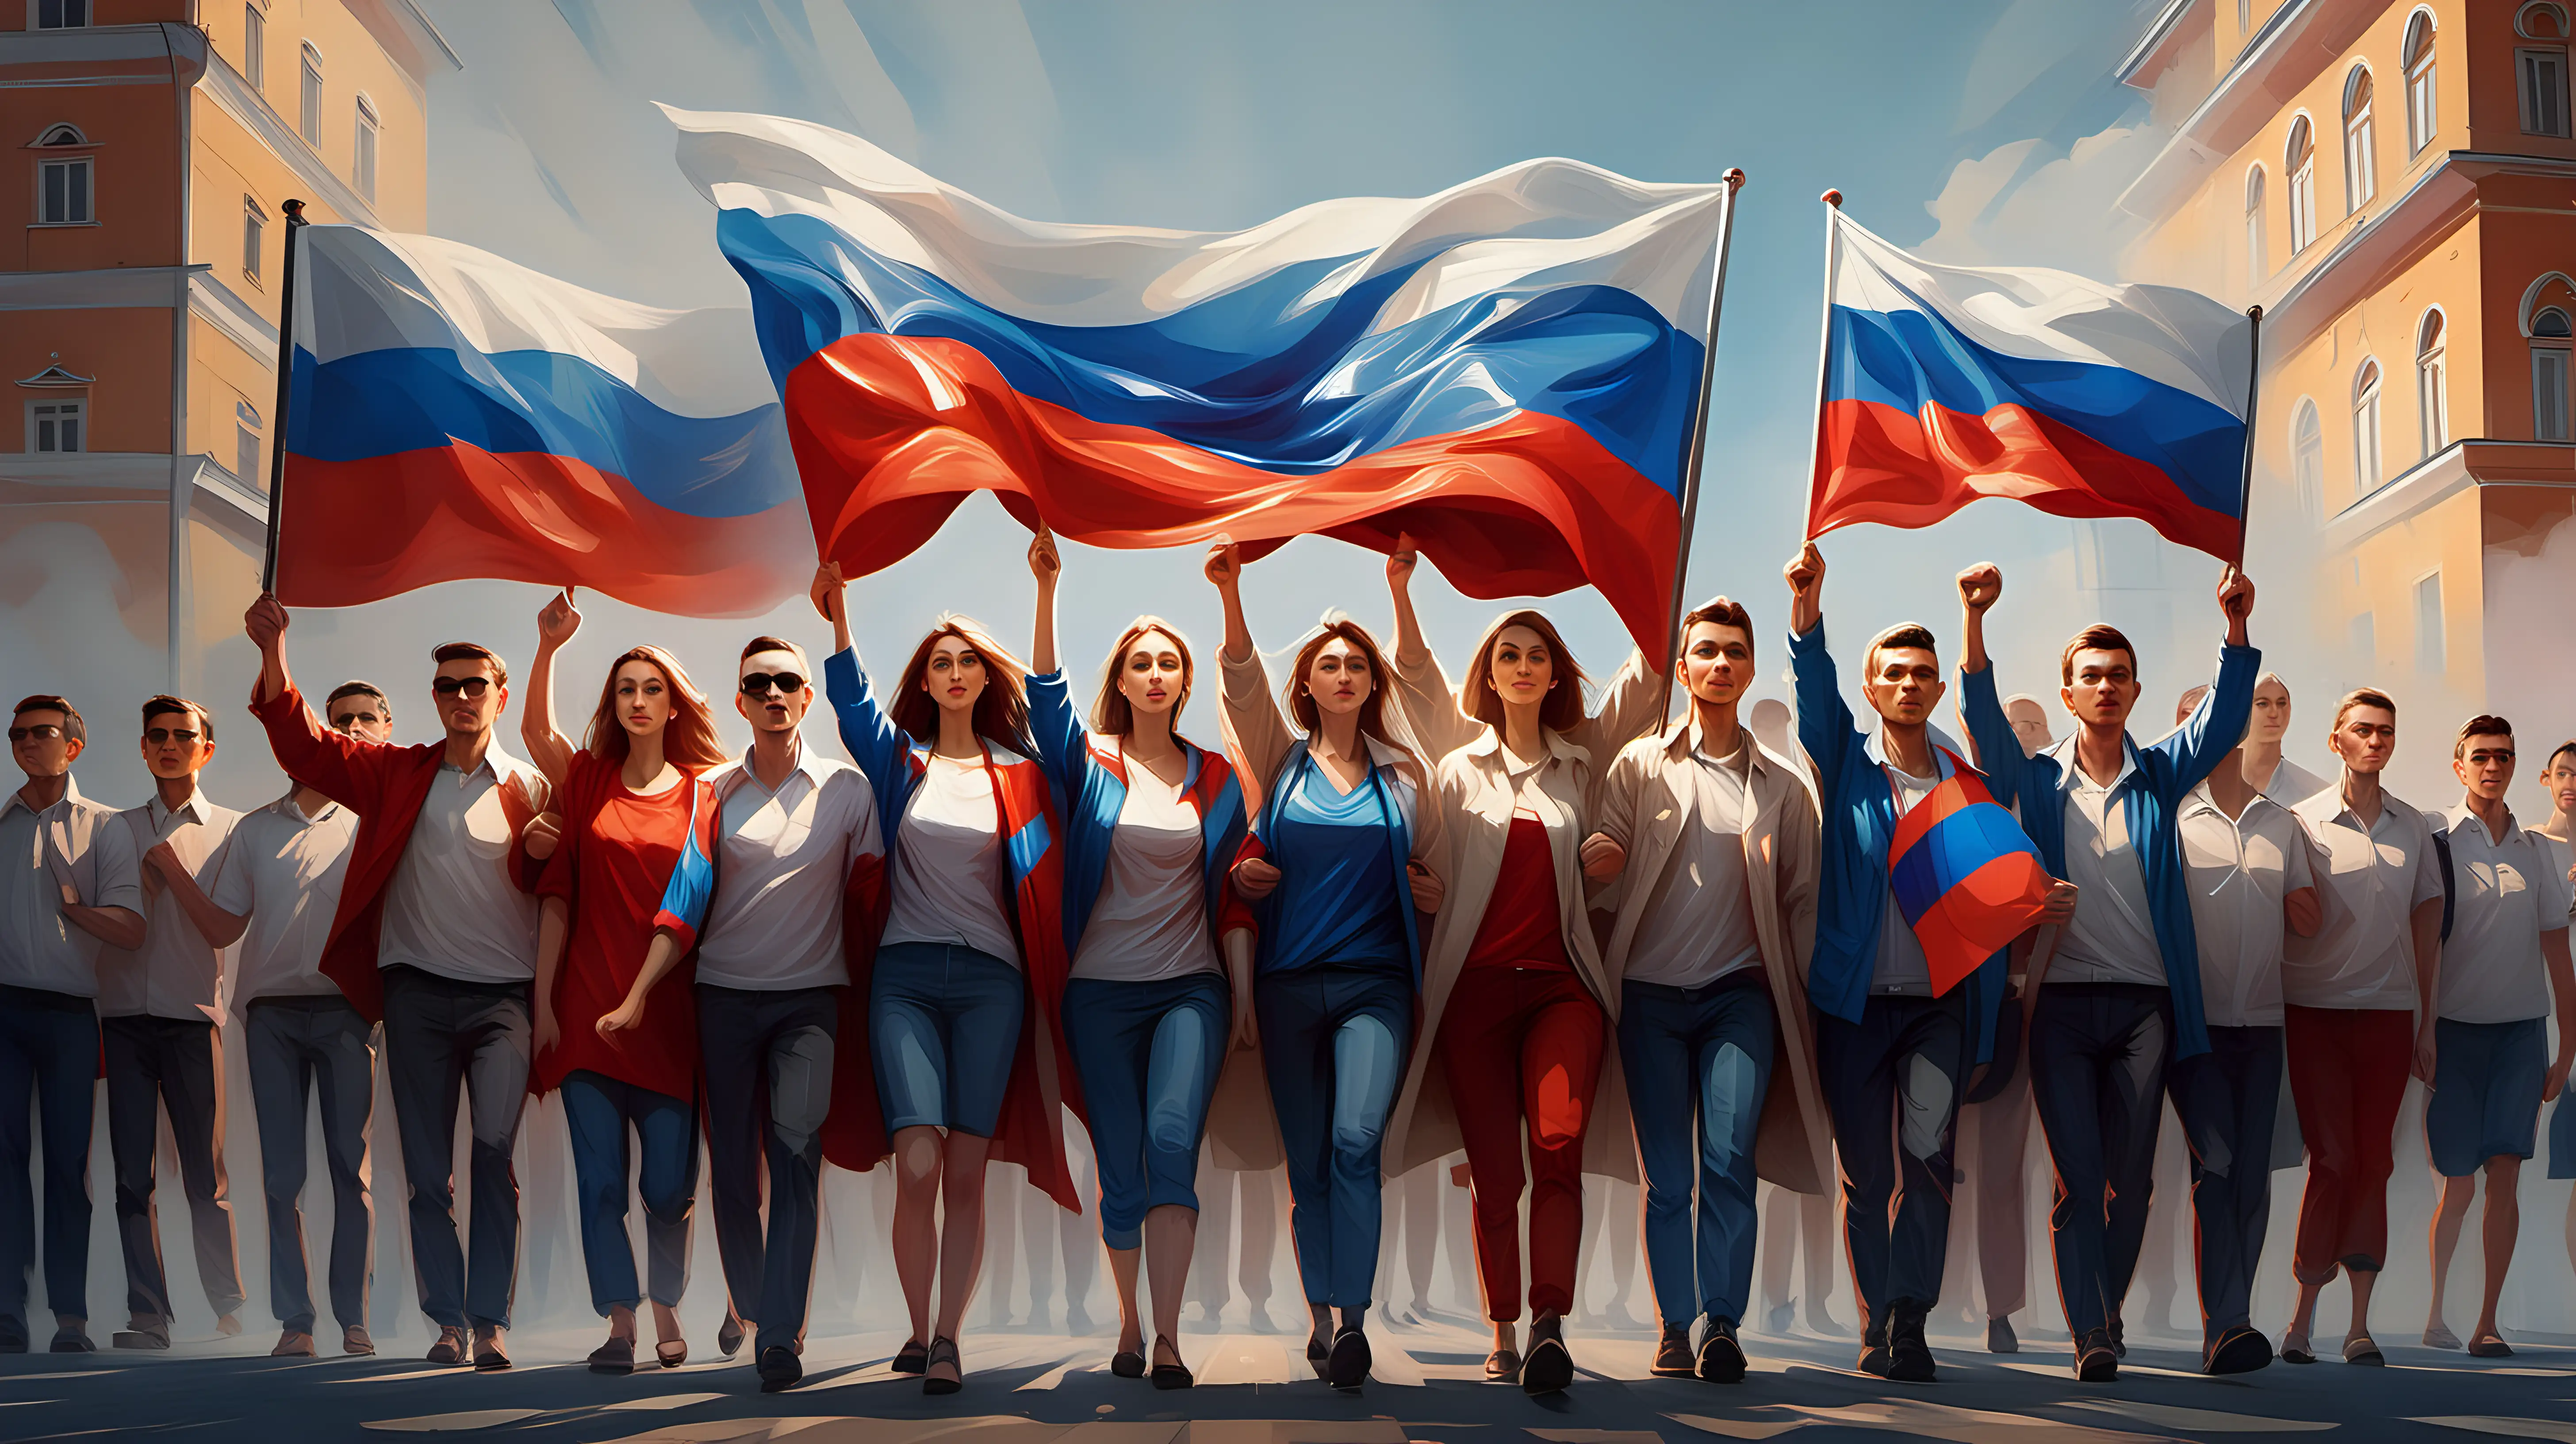 Illustrate the essence of national unity by portraying a group of people holding the Russian flag together, expressing their collective patriotism.